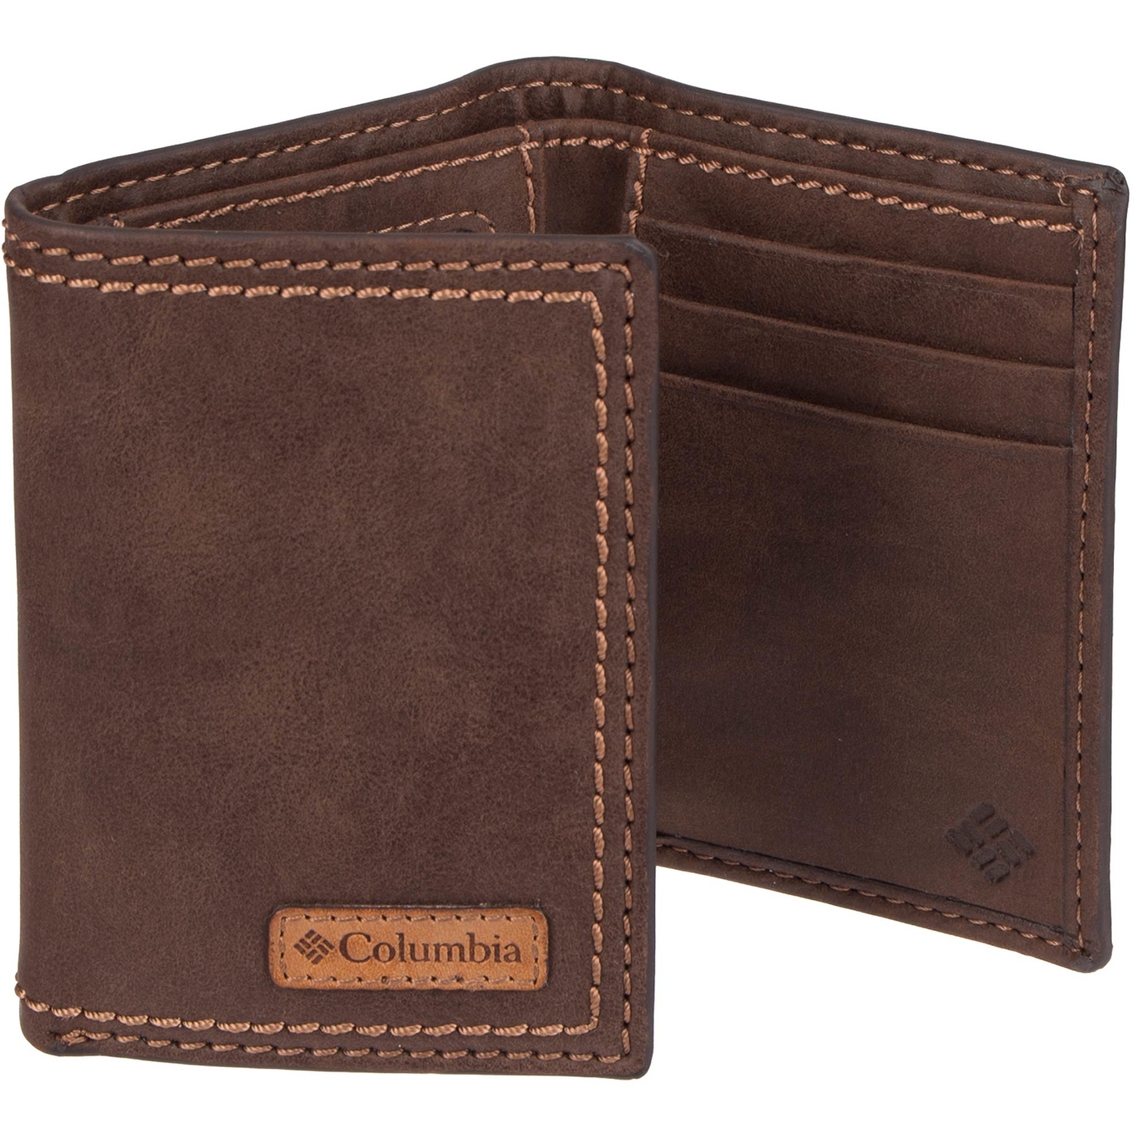 Columbia Men's Rfid Leather Trifold Wallet | Wallets | Clothing 